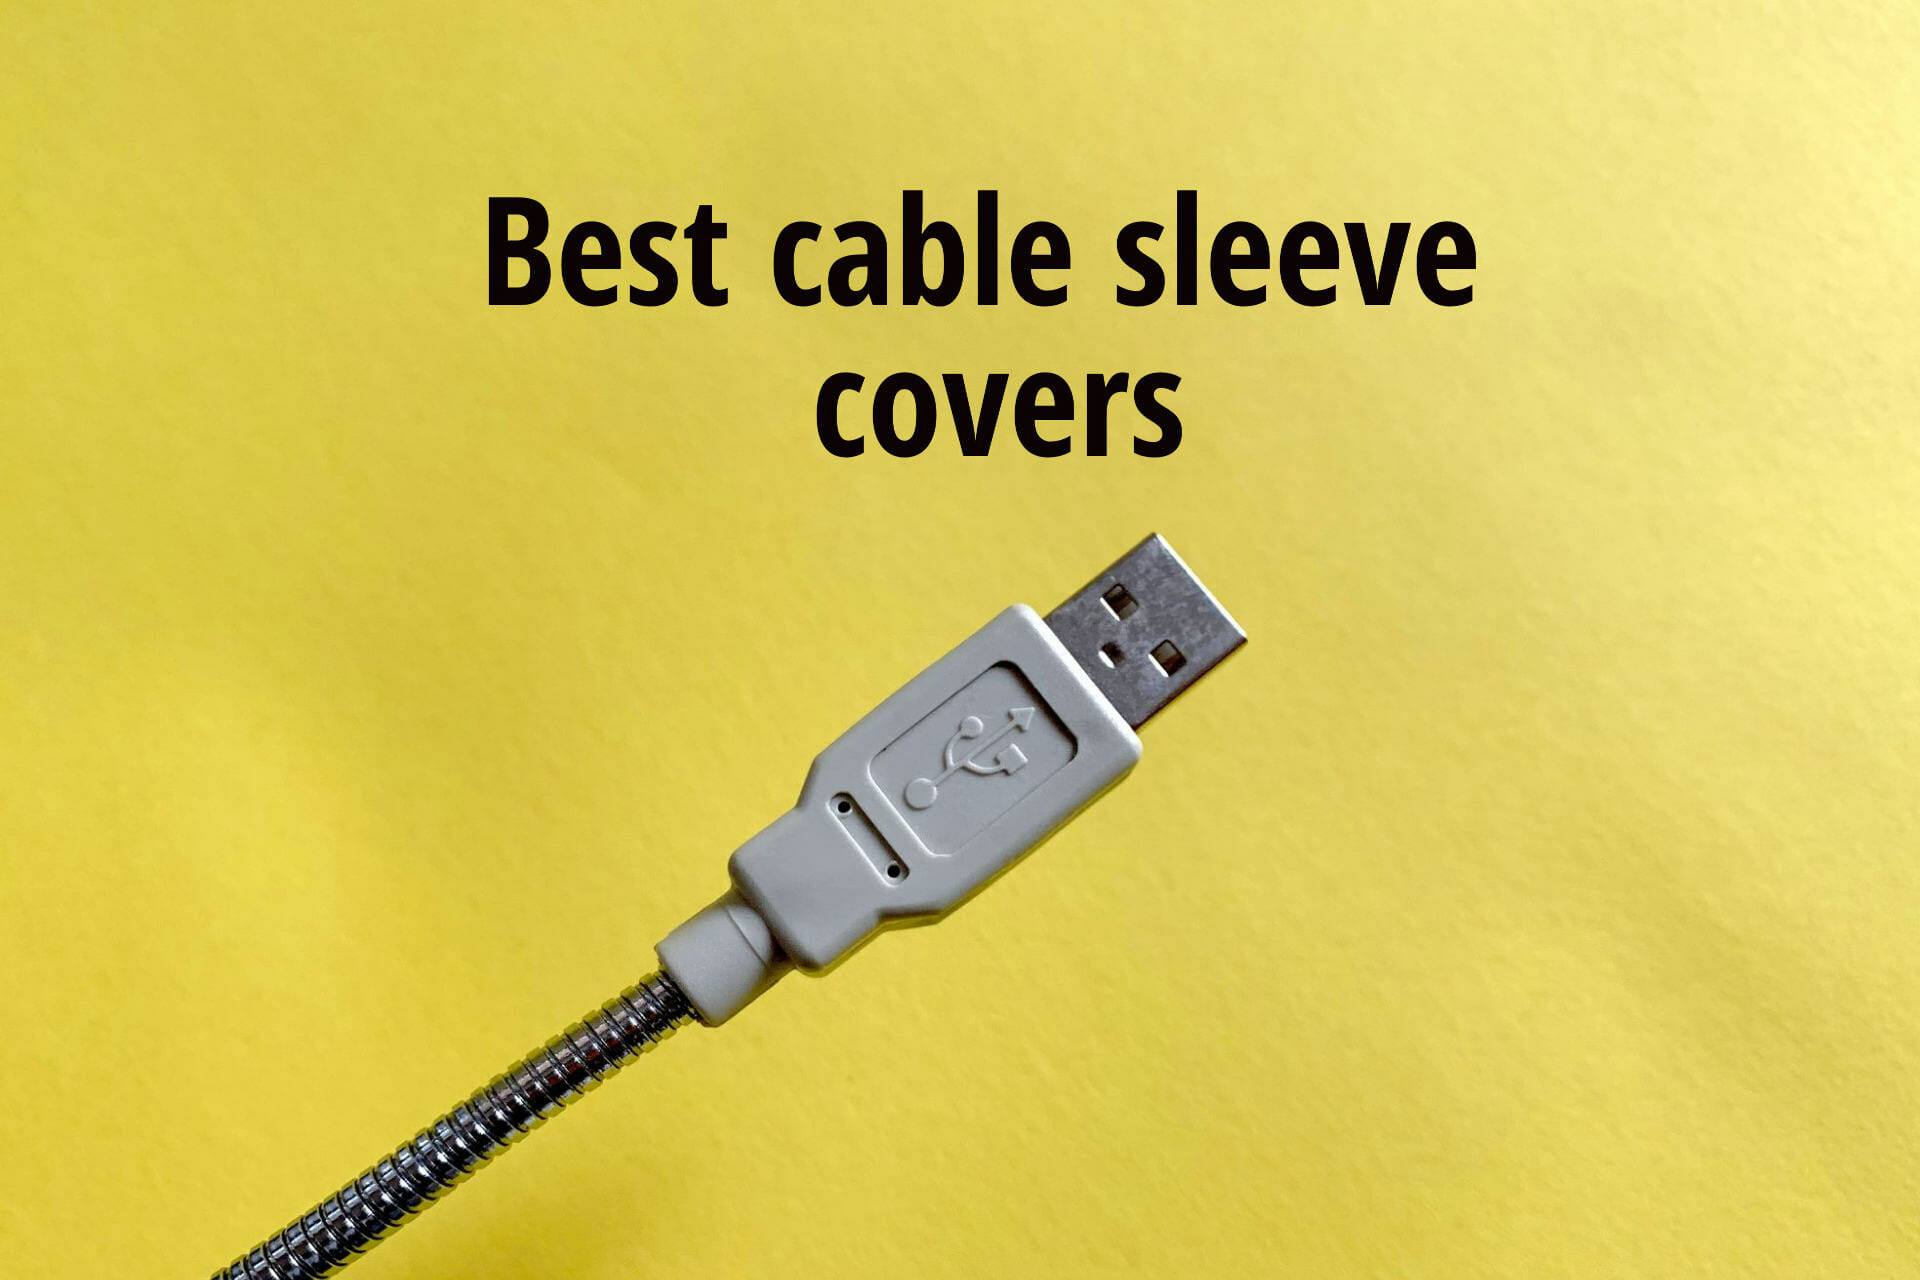 3 best cable sleeve covers